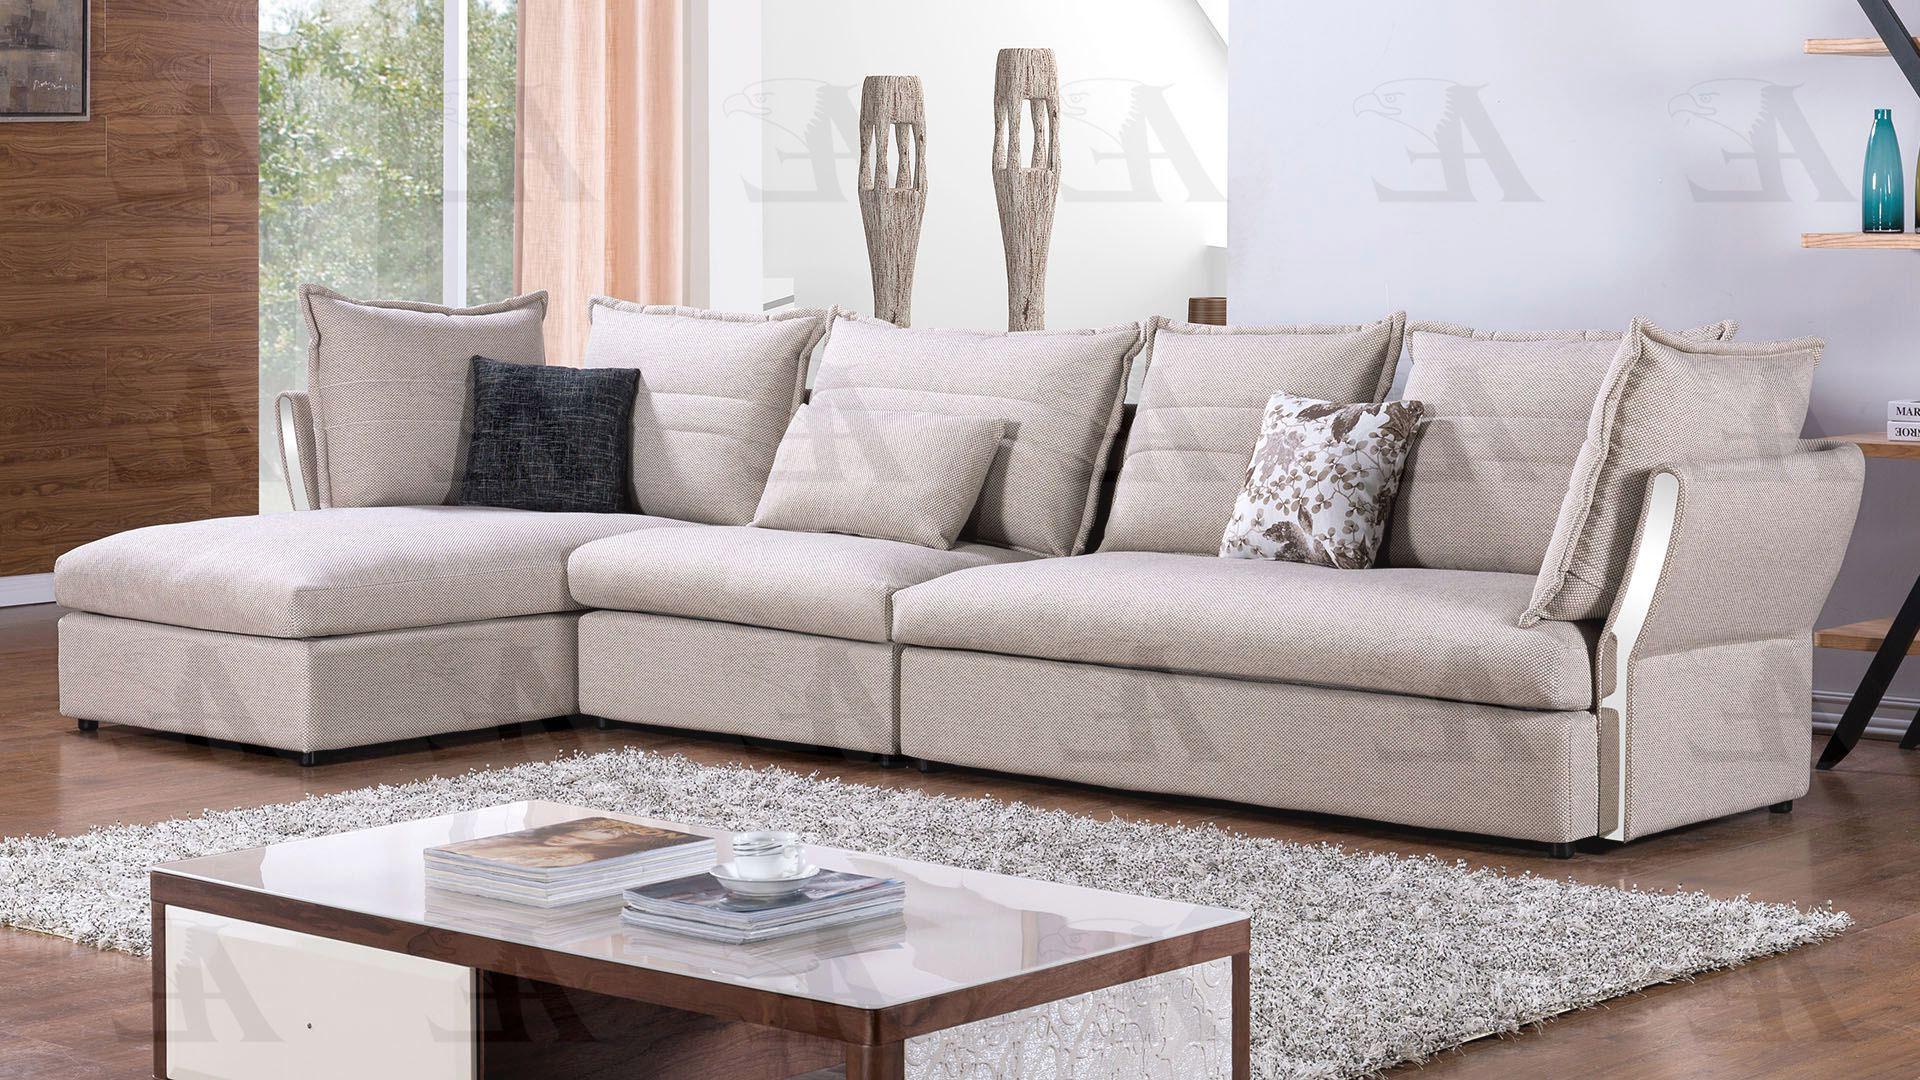 

    
American Eagle Furniture AE-L2319 Gray Fabric Tufted Sectional Sofa Chaise and Chair Set Left Hand Chase 3Pcs
